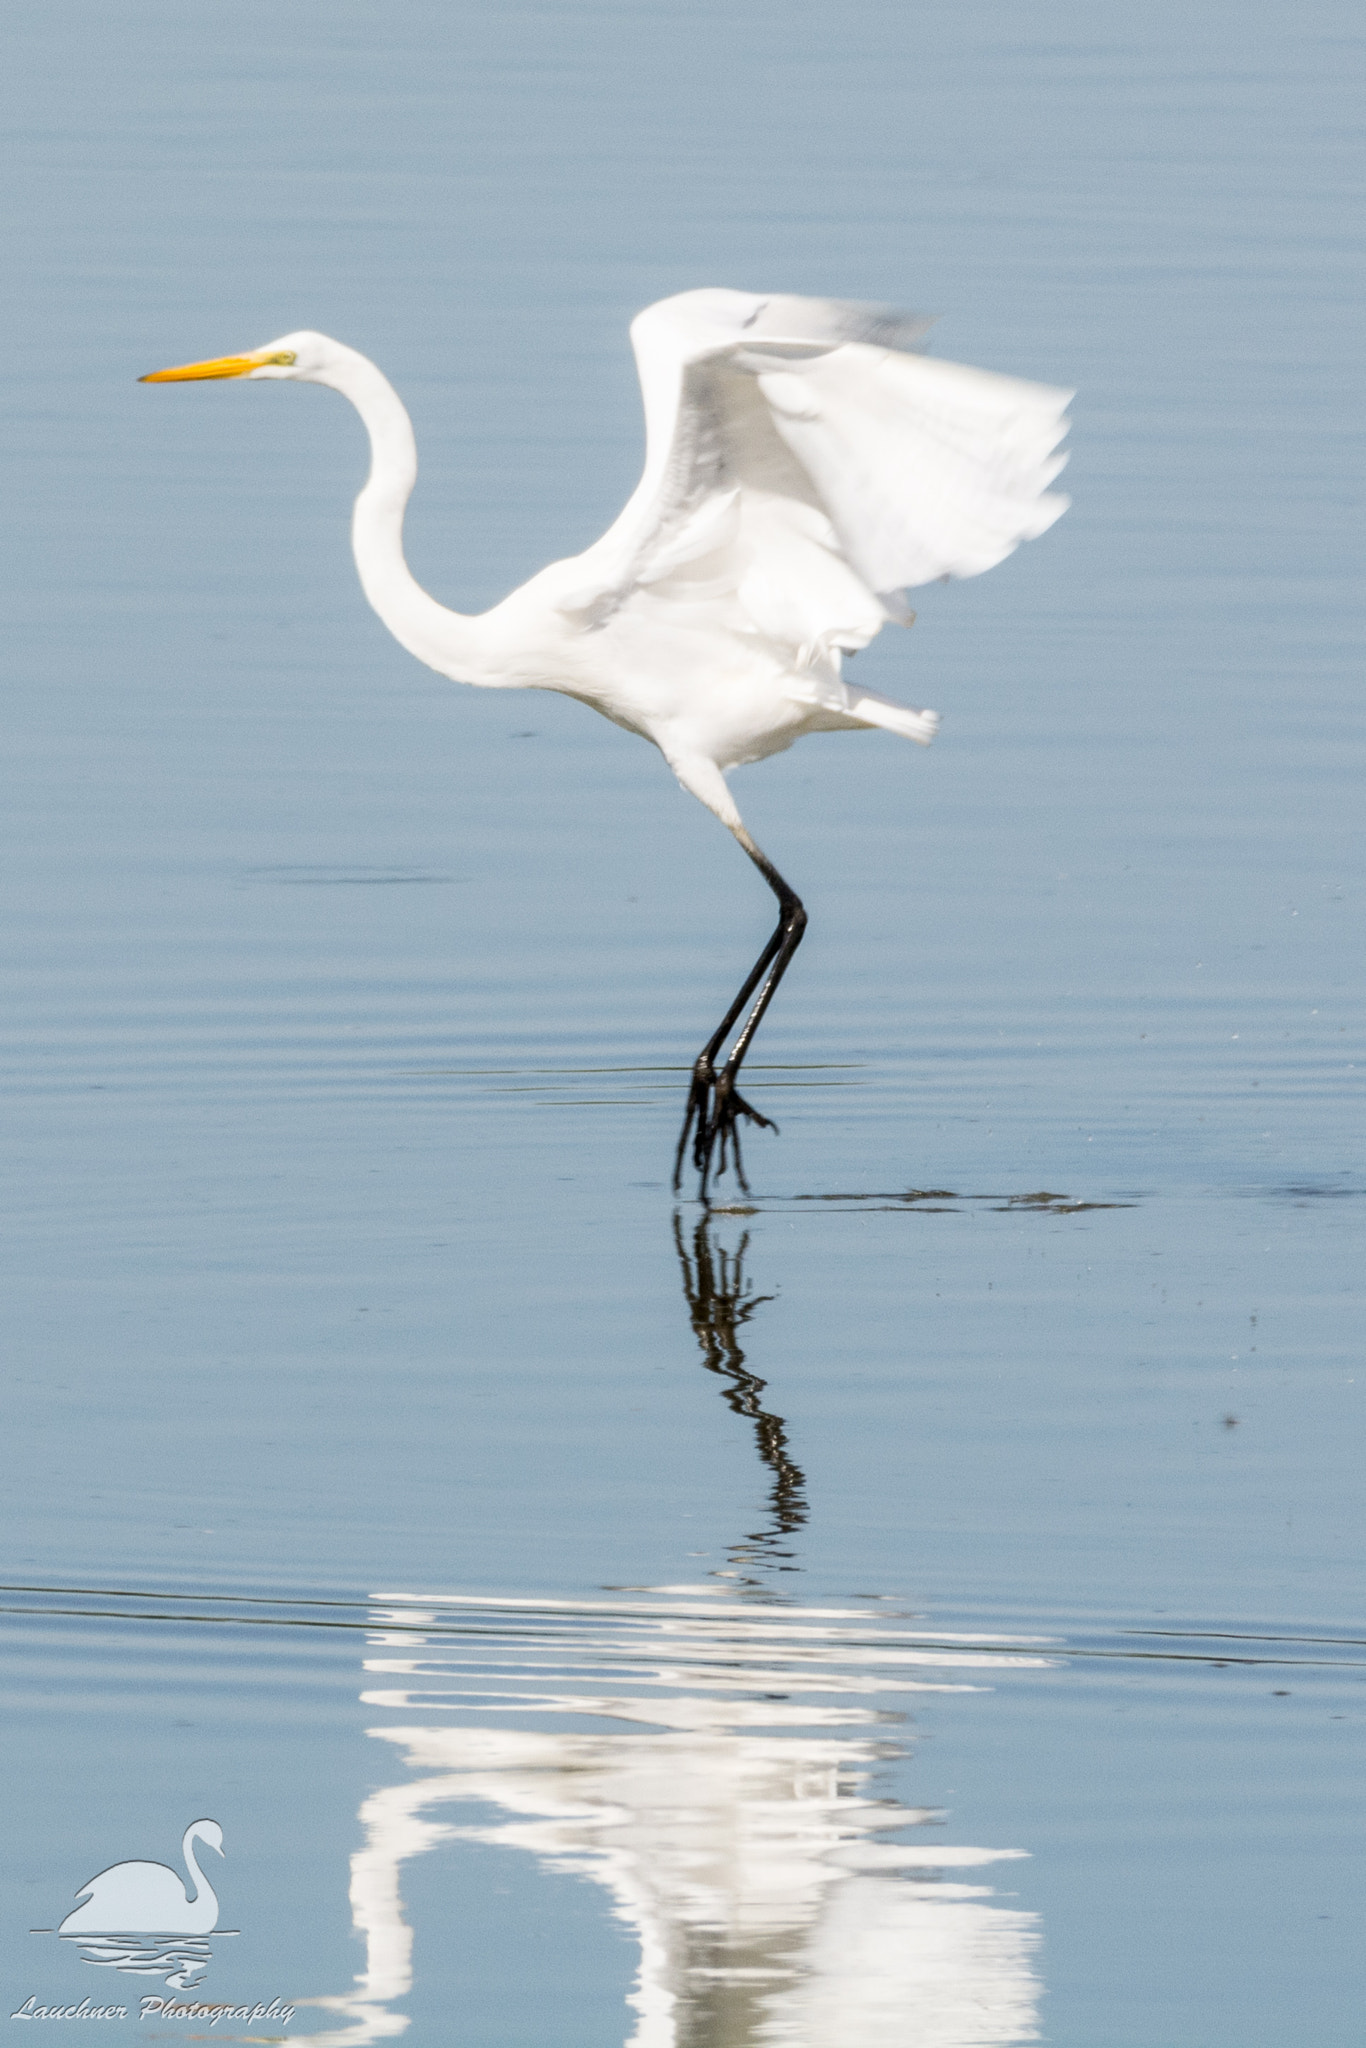 Nikon D5200 + Sigma 150-600mm F5-6.3 DG OS HSM | C sample photo. Tip-toeing on the water photography